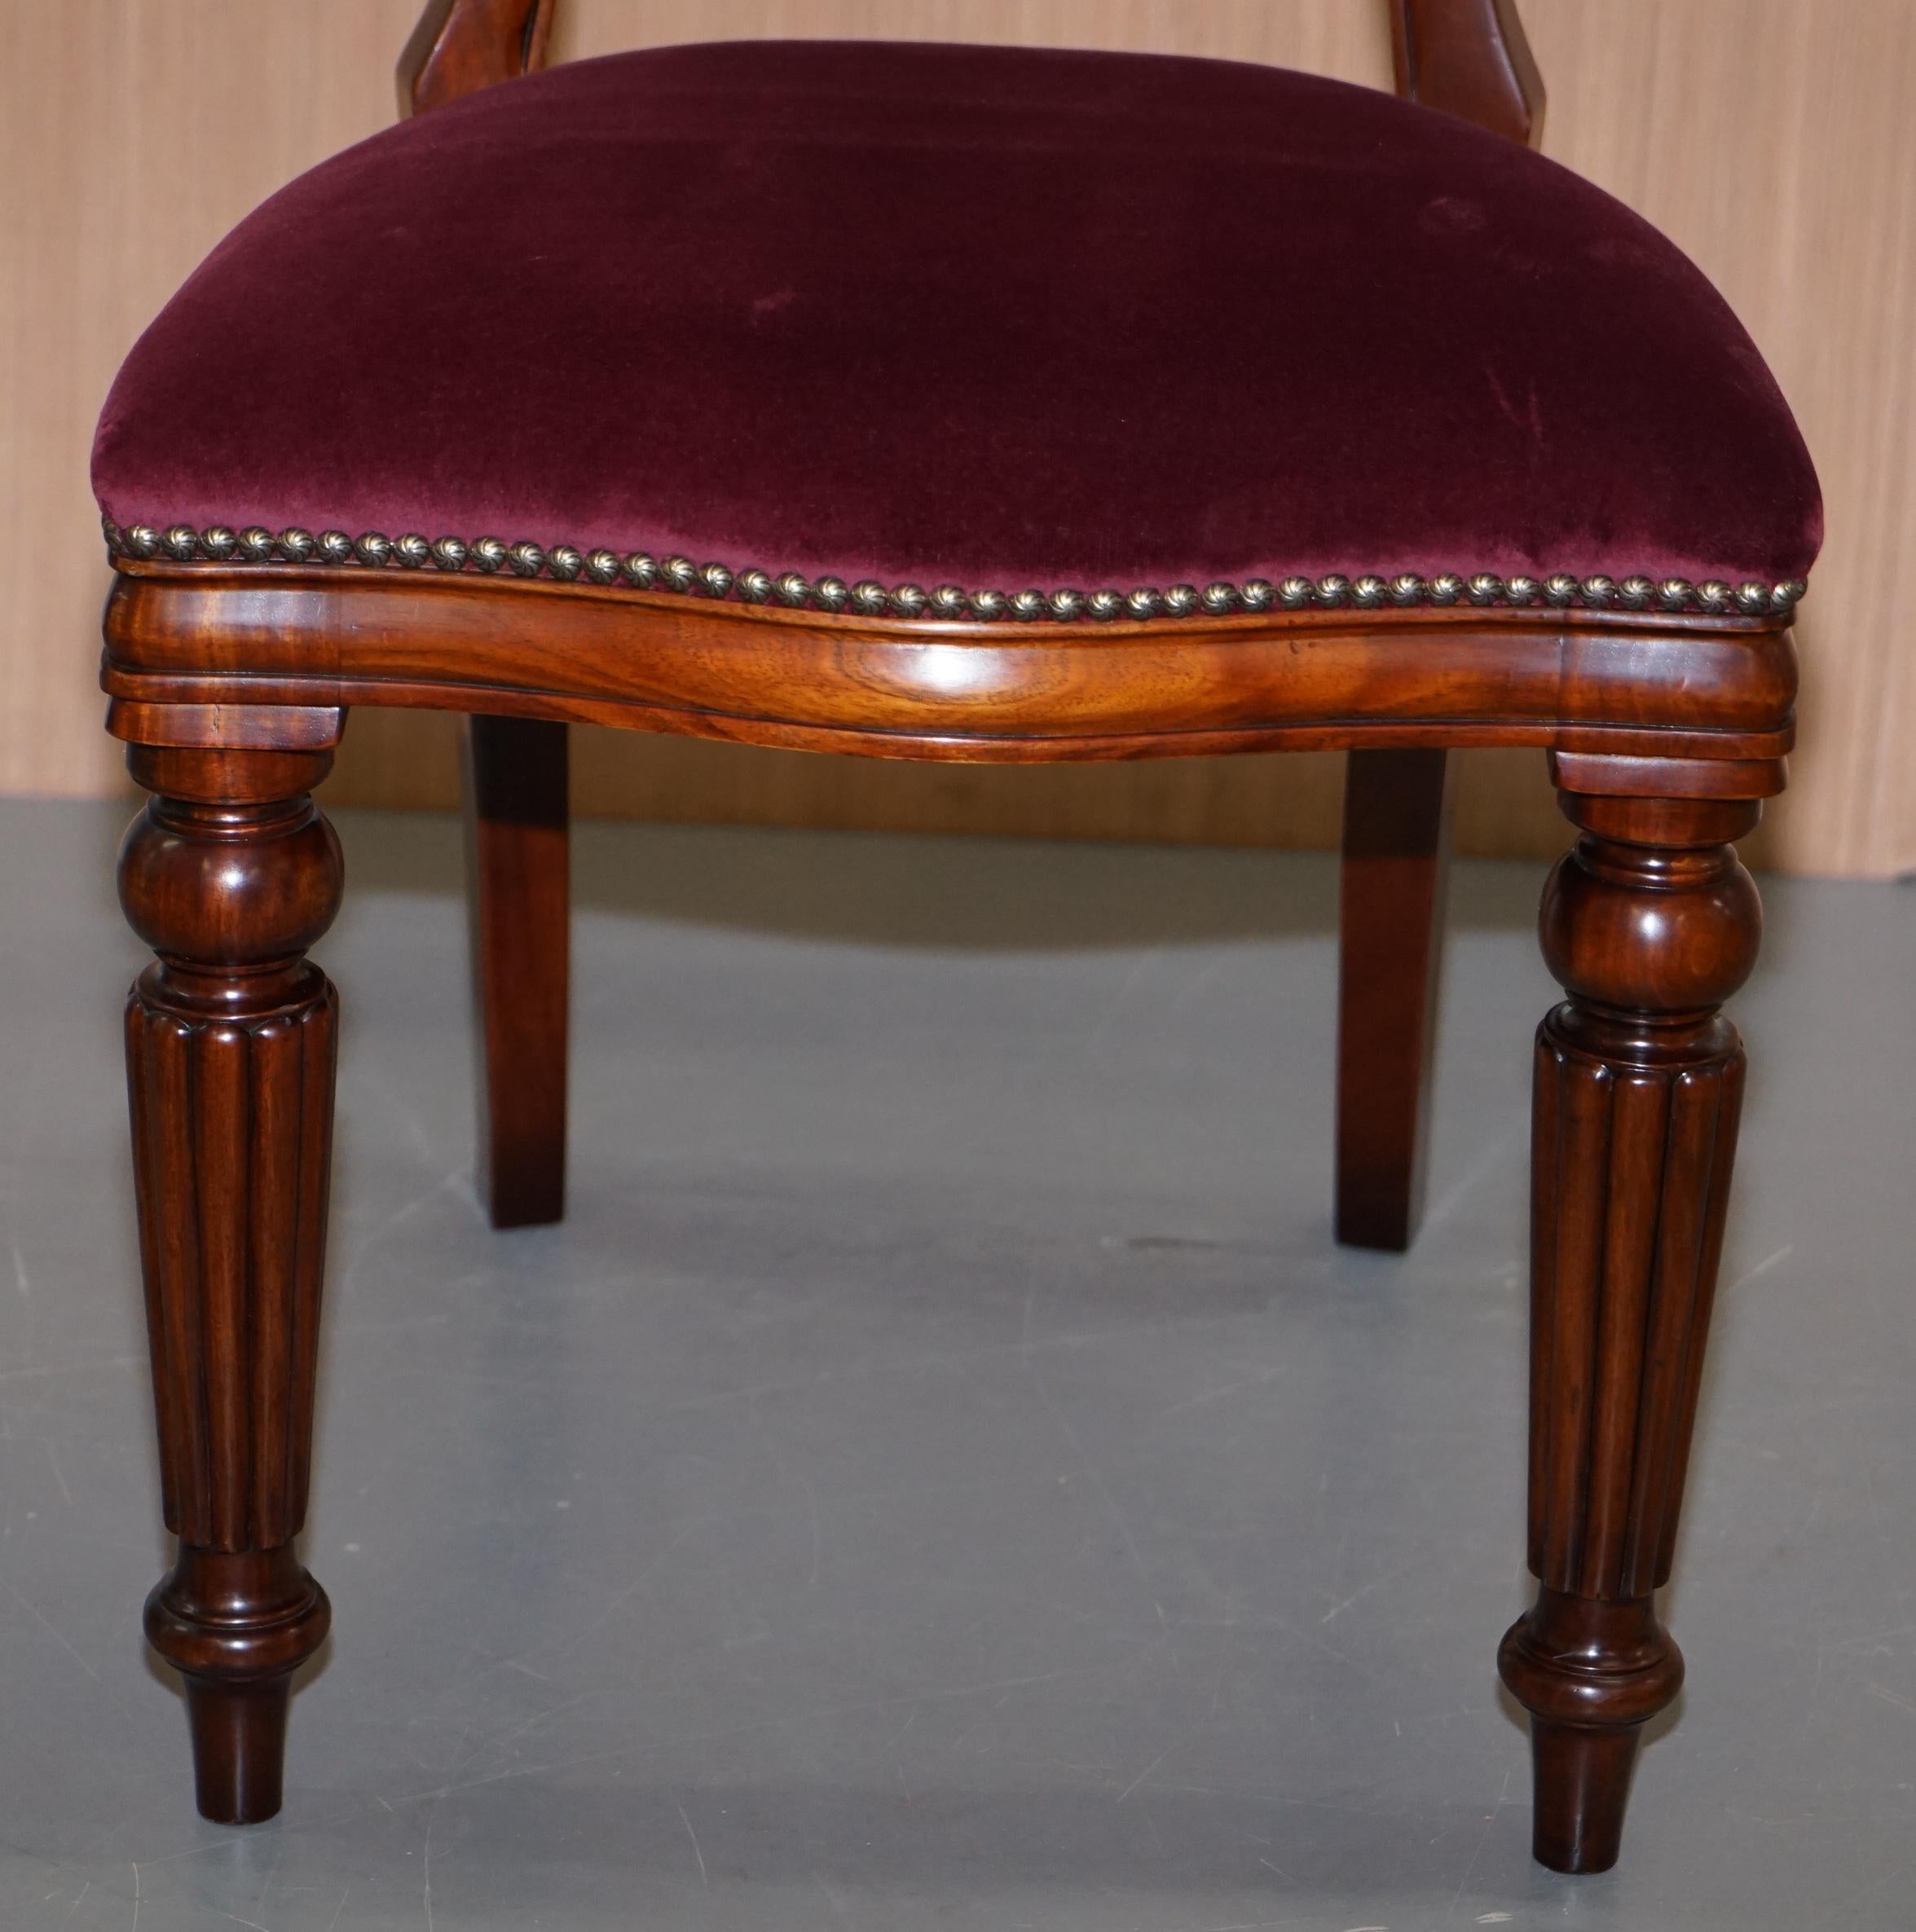 English Pair of Frank Hudson & Sons Harrods Stamped Medallion Hardwood Dining Chairs